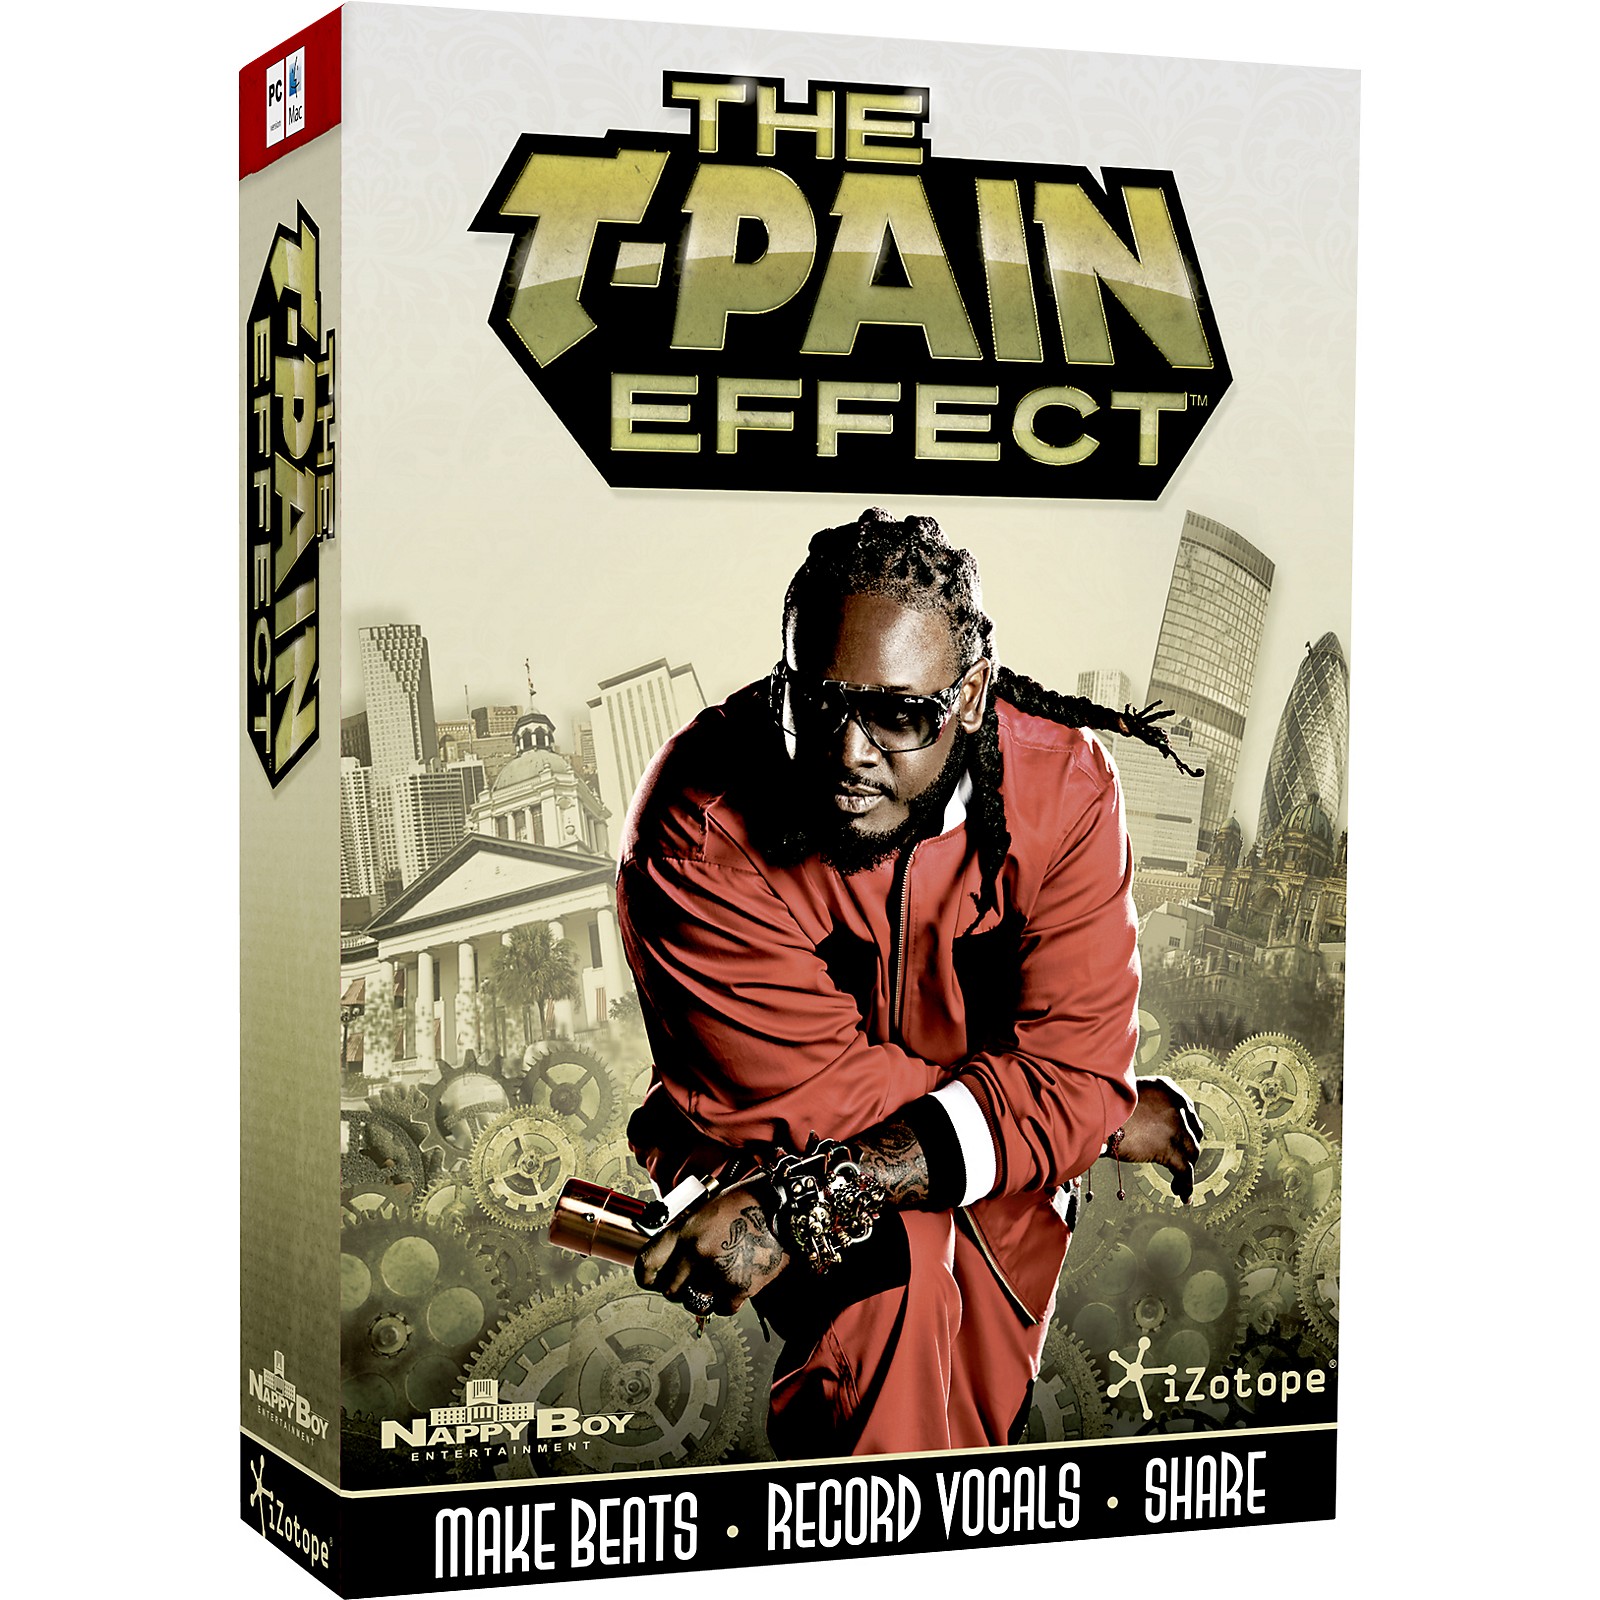 the t pain engine cracked